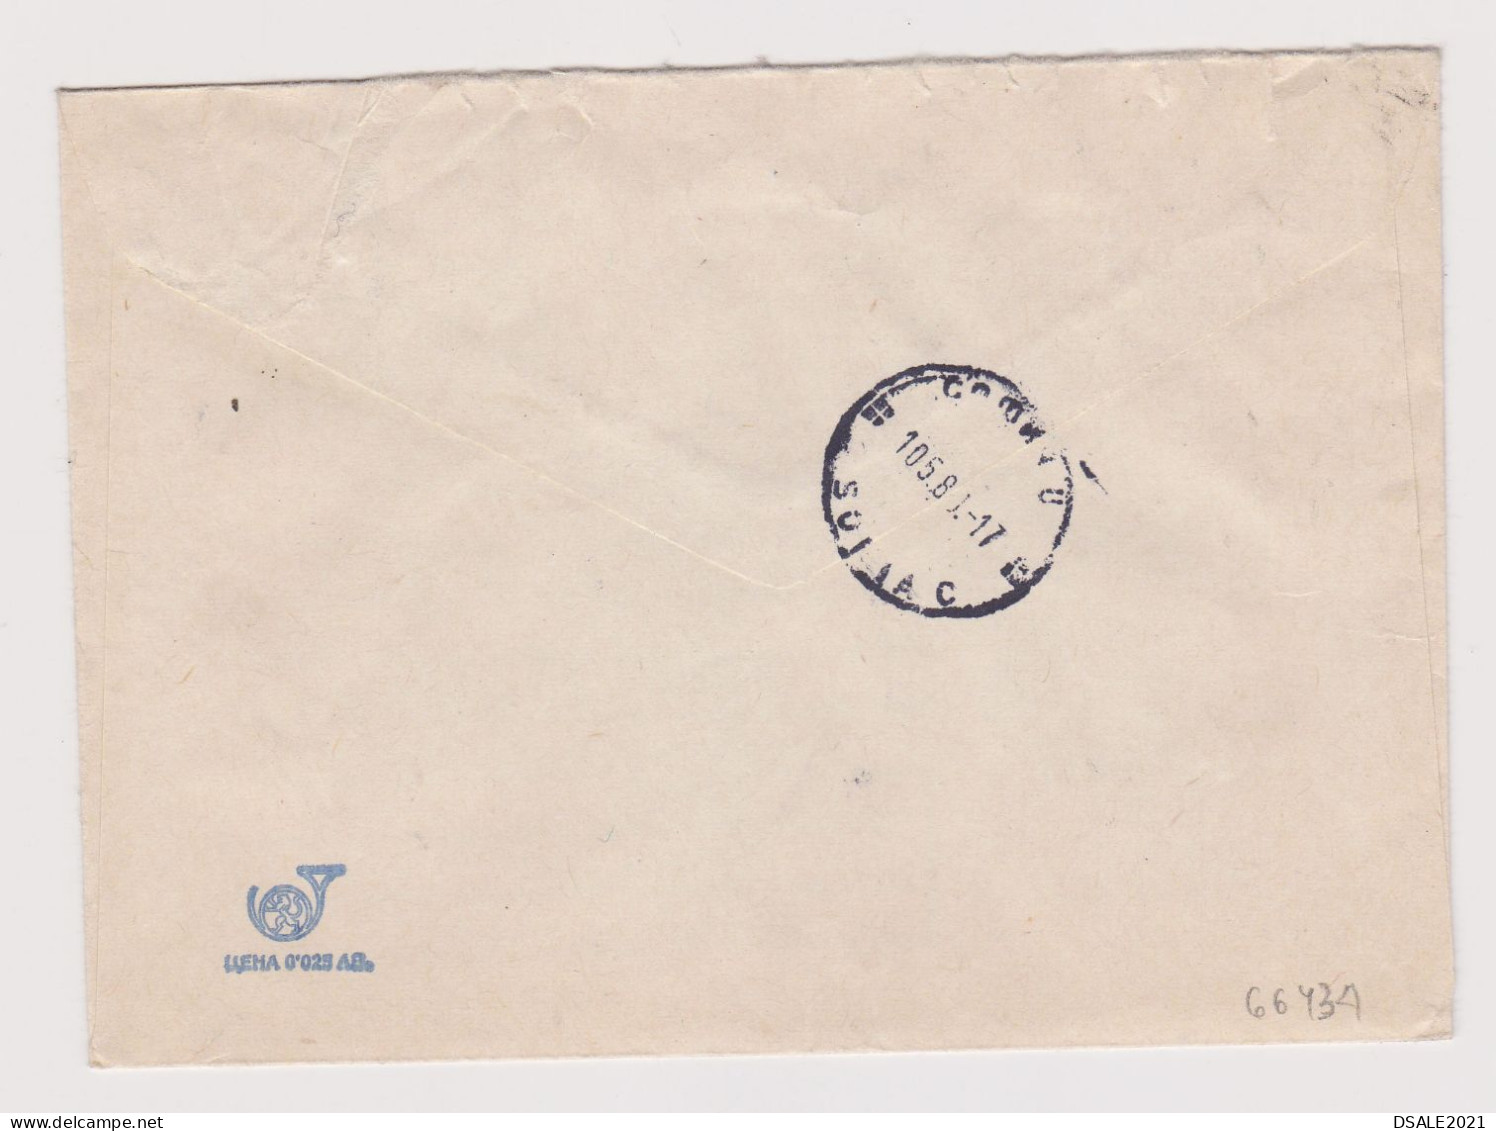 Bulgaria Bulgarien Bulgarie 1980 Postal Stationery Cover PSE, Entier, Registered With Color Topic Stamps (66434) - Covers